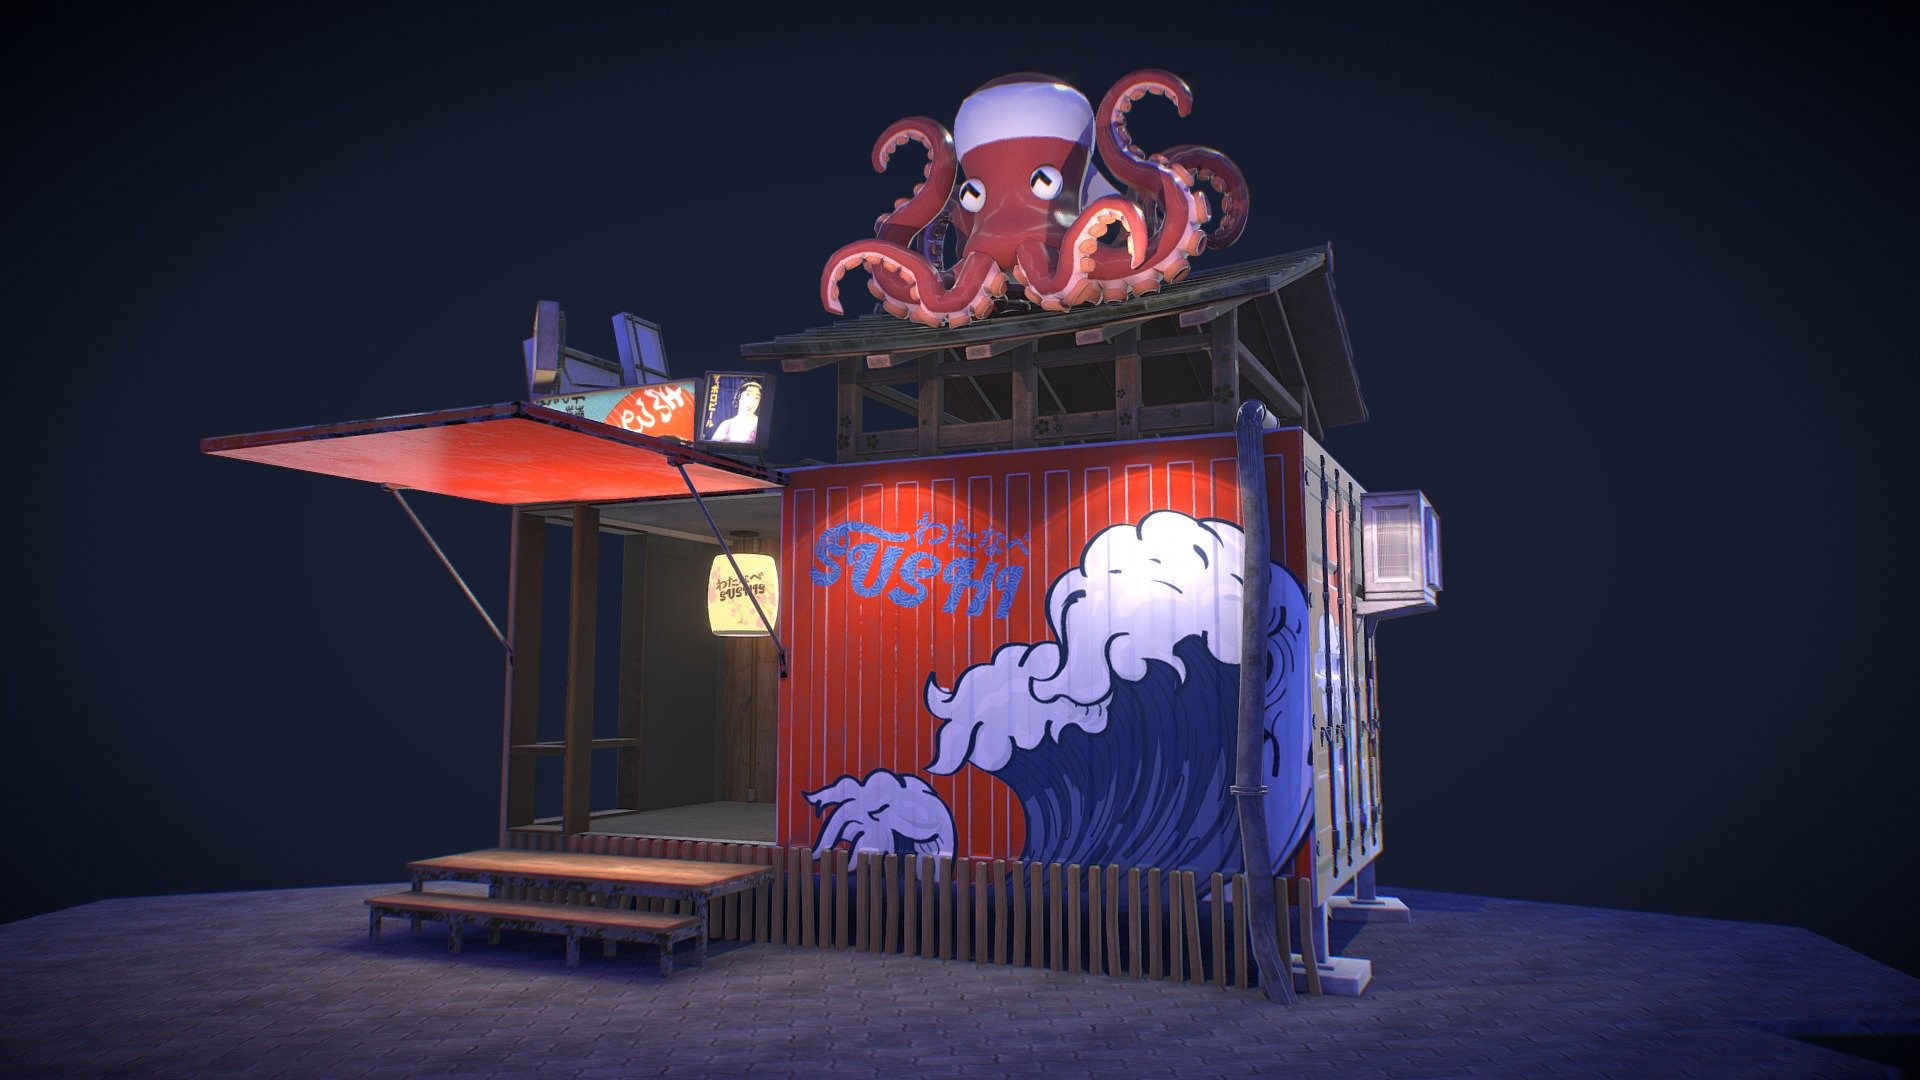 There it is, i have finally made the interior of my container restaurant. It is small but welcoming, drop by and have a bite ! - 🌸 Night Container Izakaya 🌸 - 3D model by Titank (@Titank_Crealis) 3d model